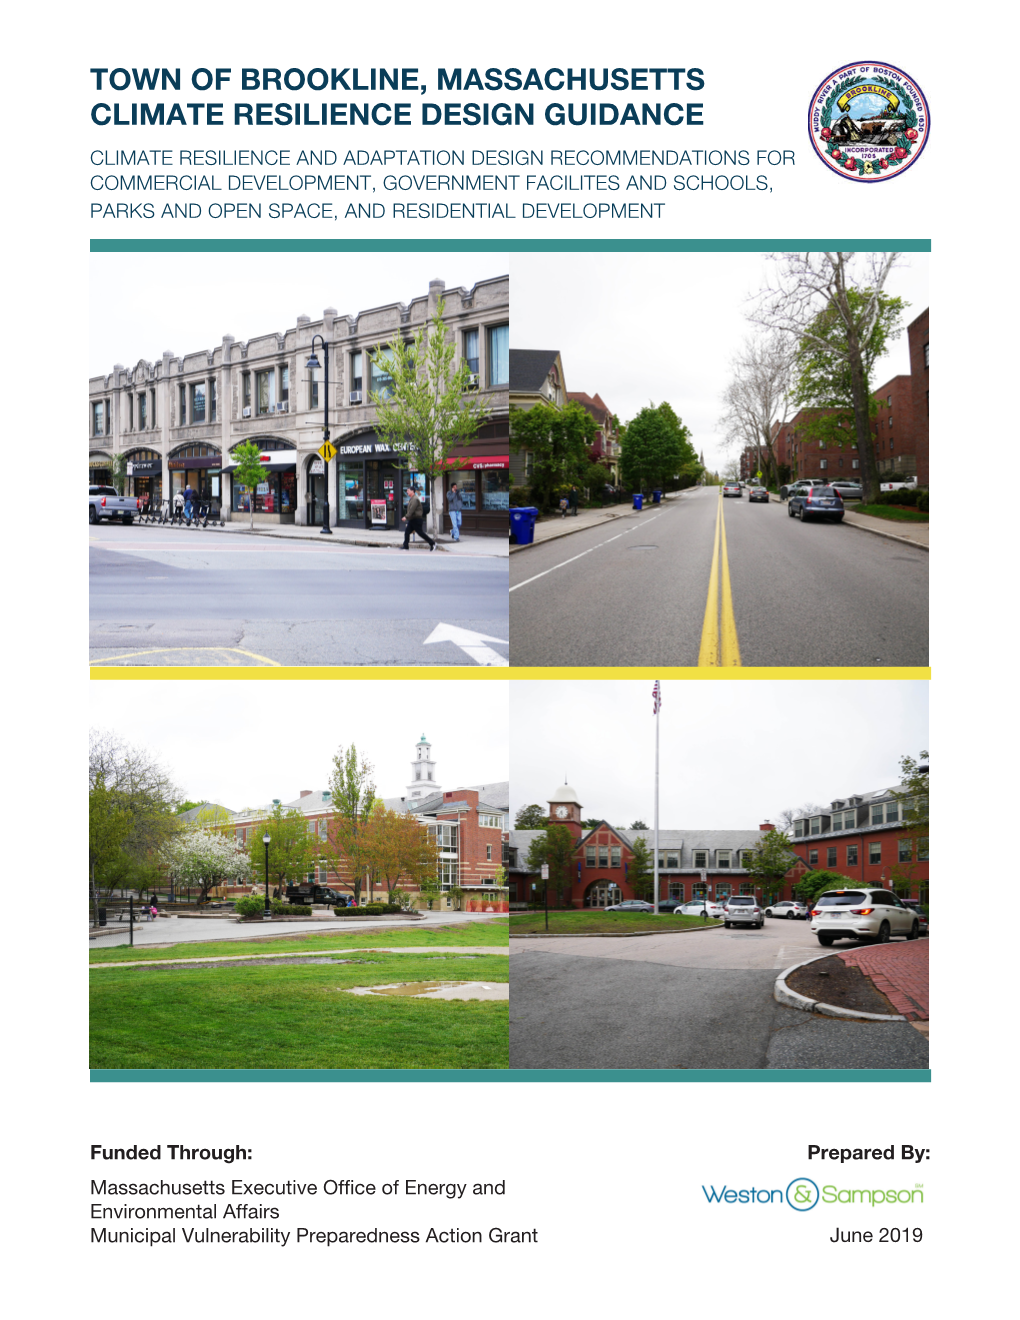 The Town of Brookline, Massachusetts Climate Resilience